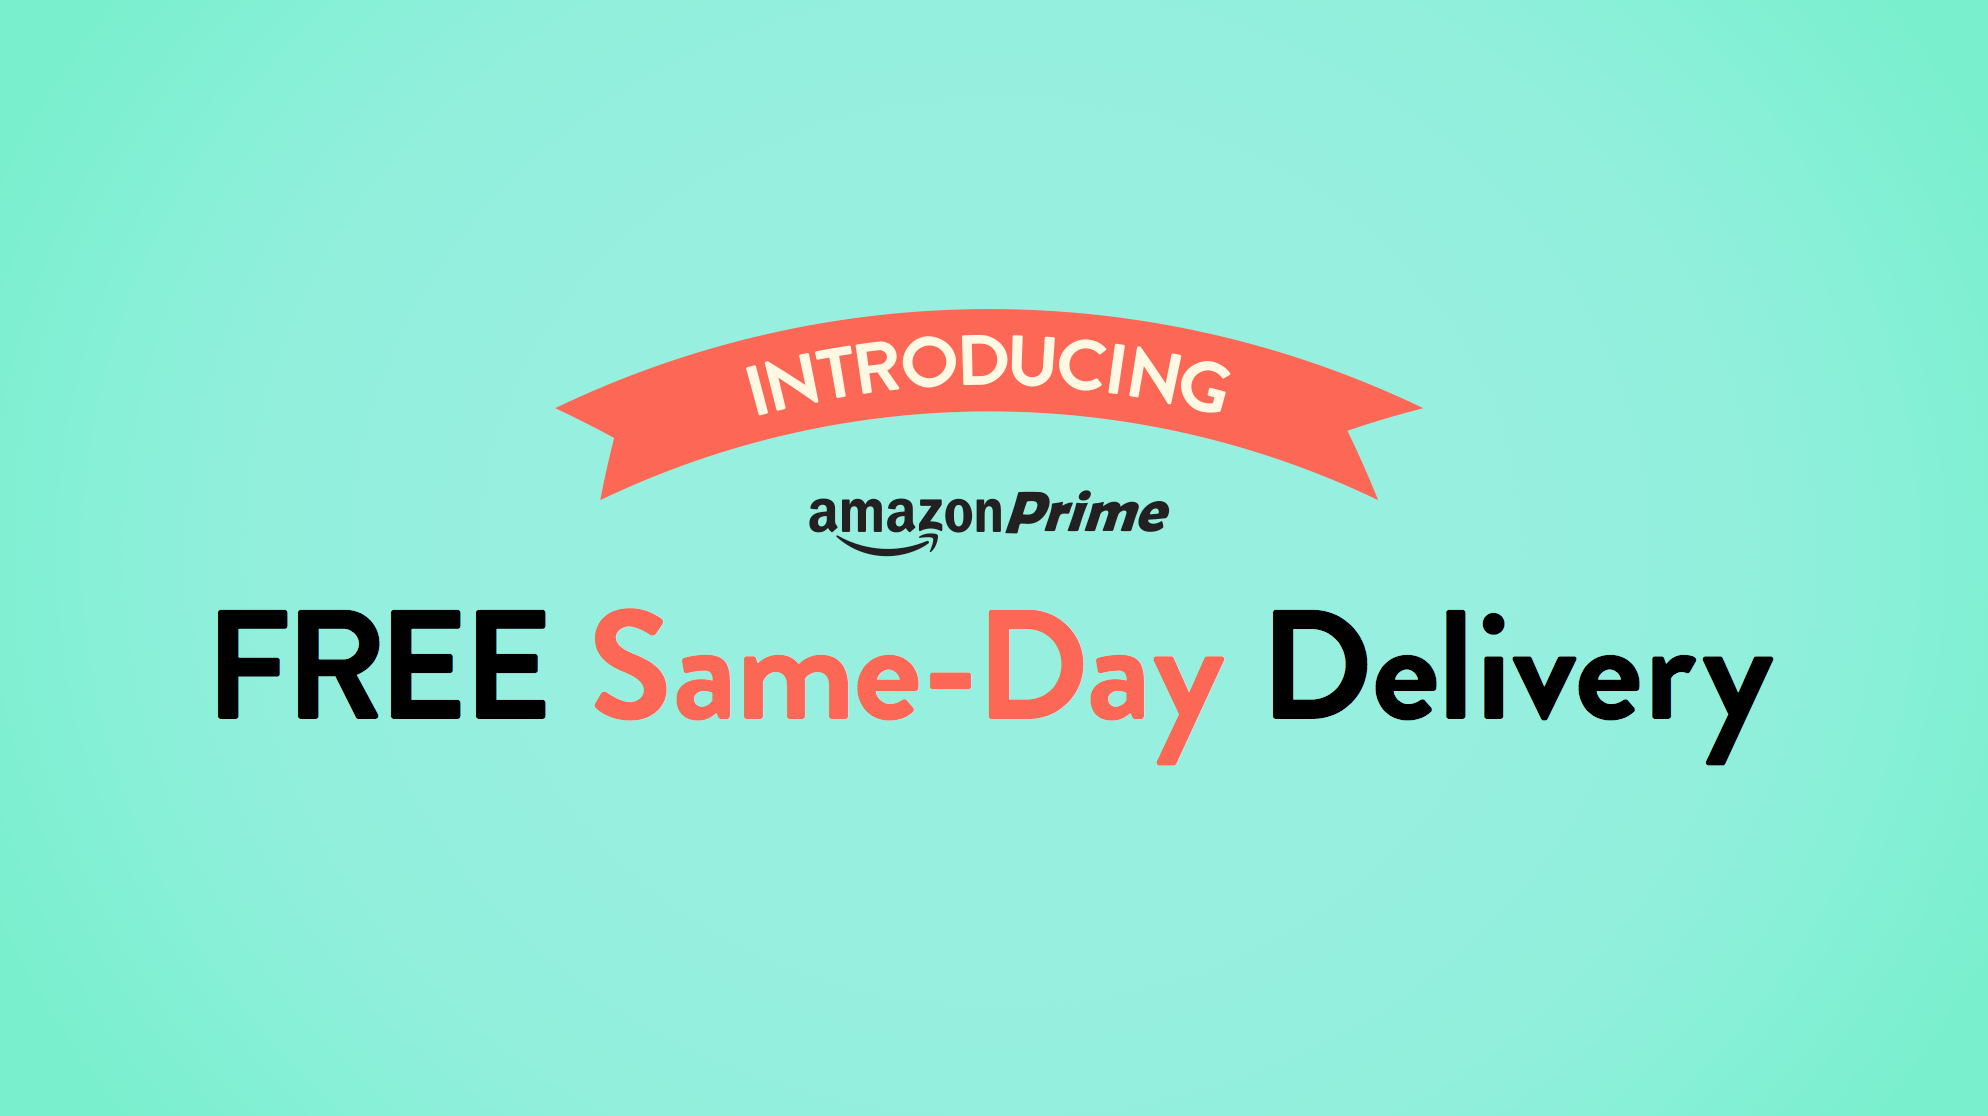 Prime's Free One-Day Delivery - Truth in Advertising